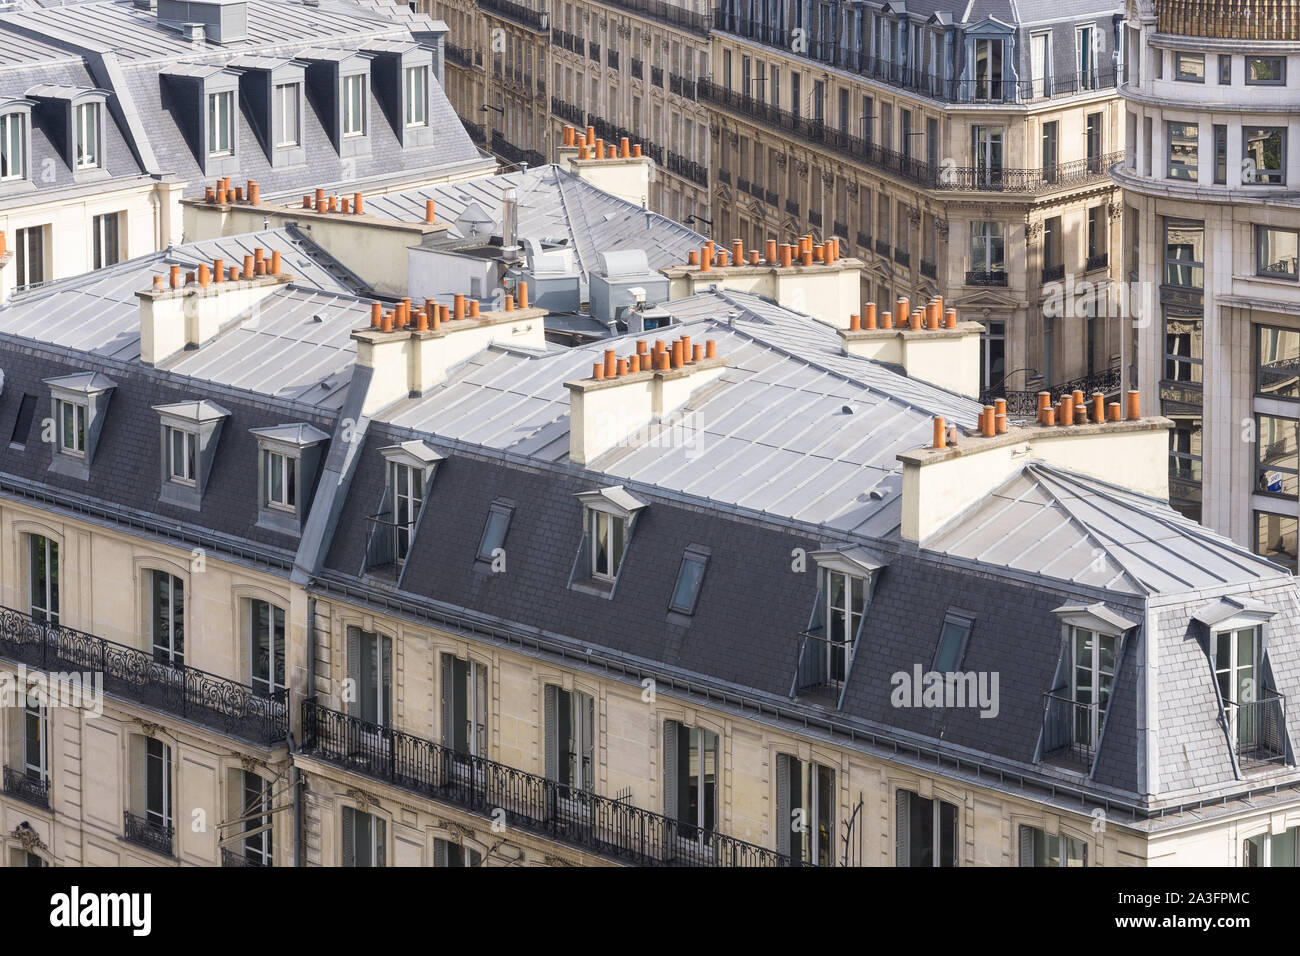 Paris roofs - Typical roof of a Haussmann-style building in Paris with chimneypots. France, Europe. Stock Photo